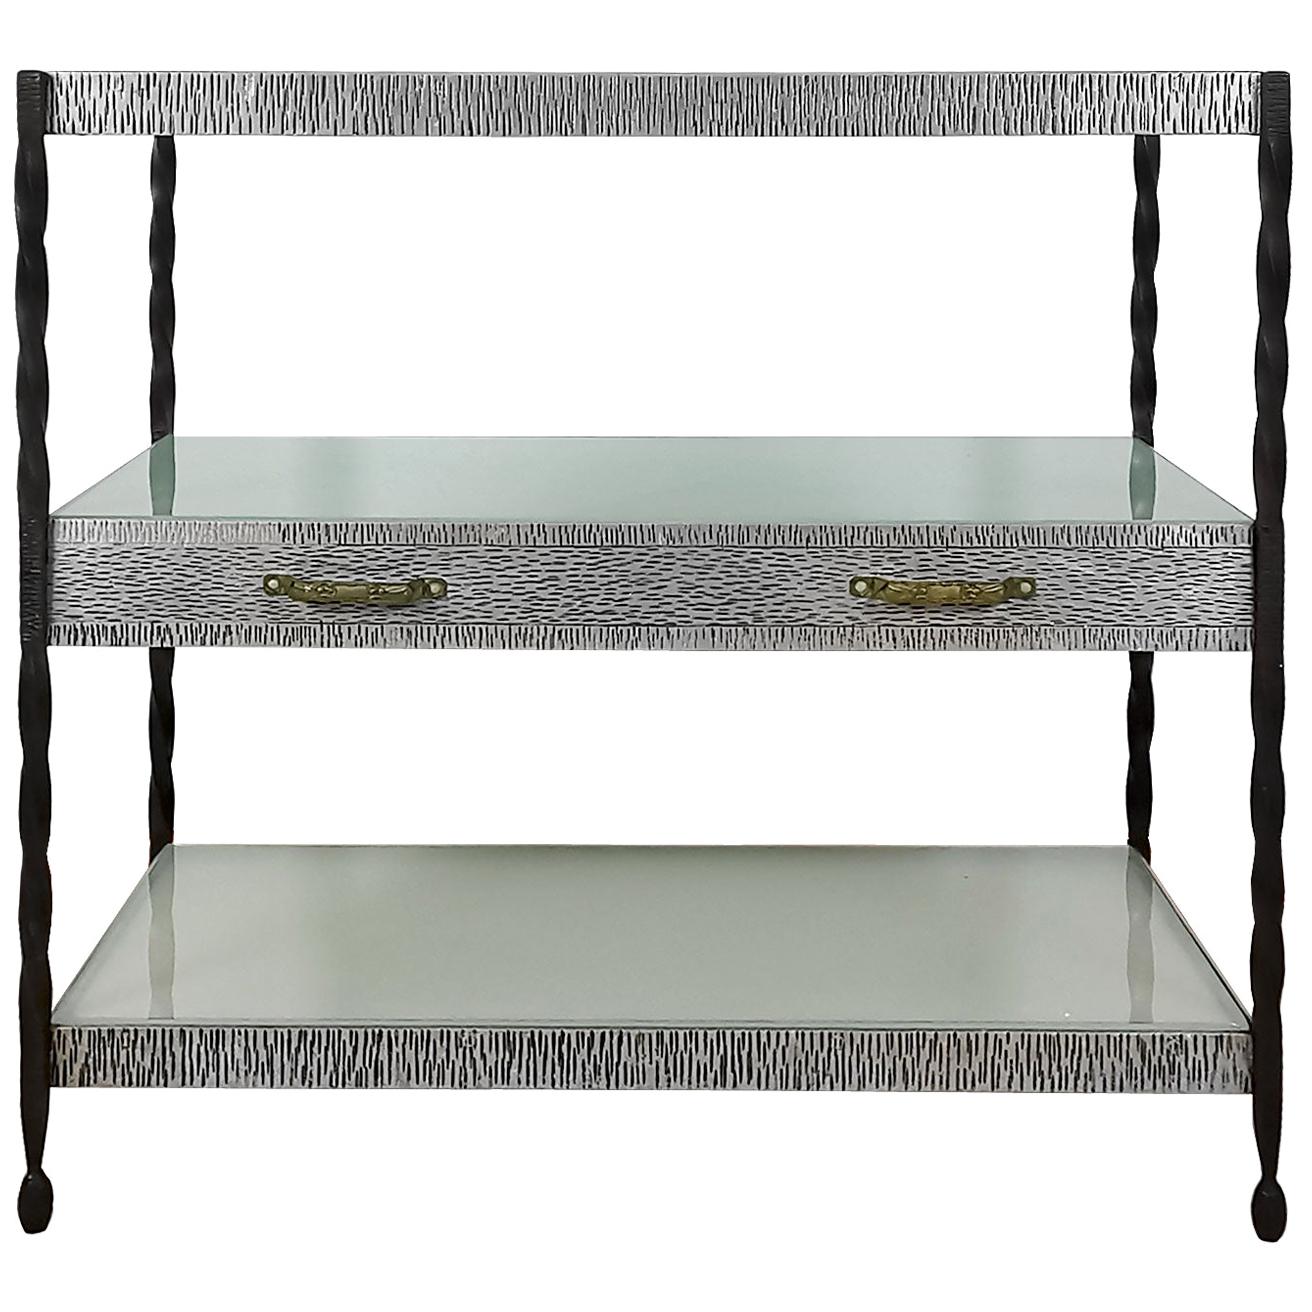 Art Deco Center Shelving Unit, Wrought Iron, Metal, Brass and Glass - France For Sale